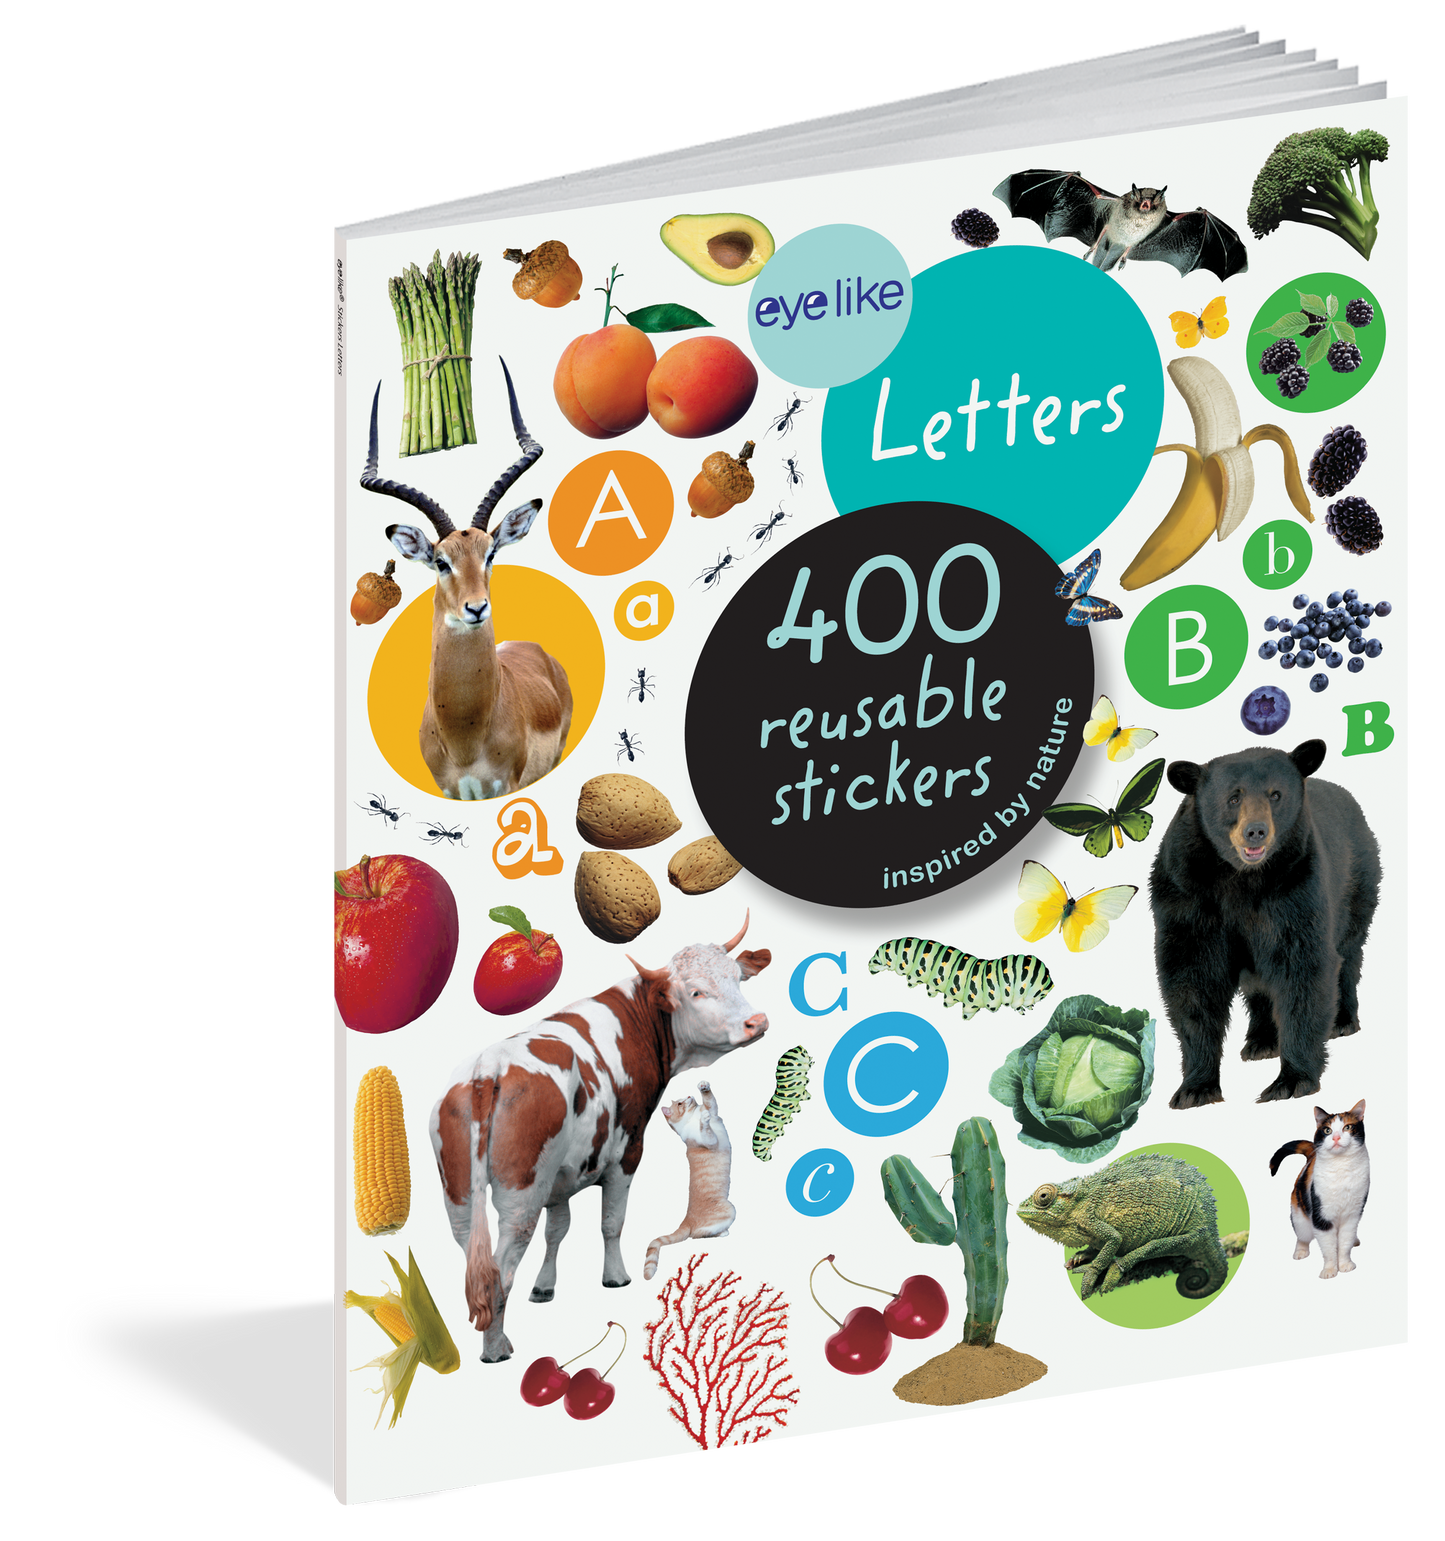 Eyelike Stickers: Letters Inspired by Nature (L304)